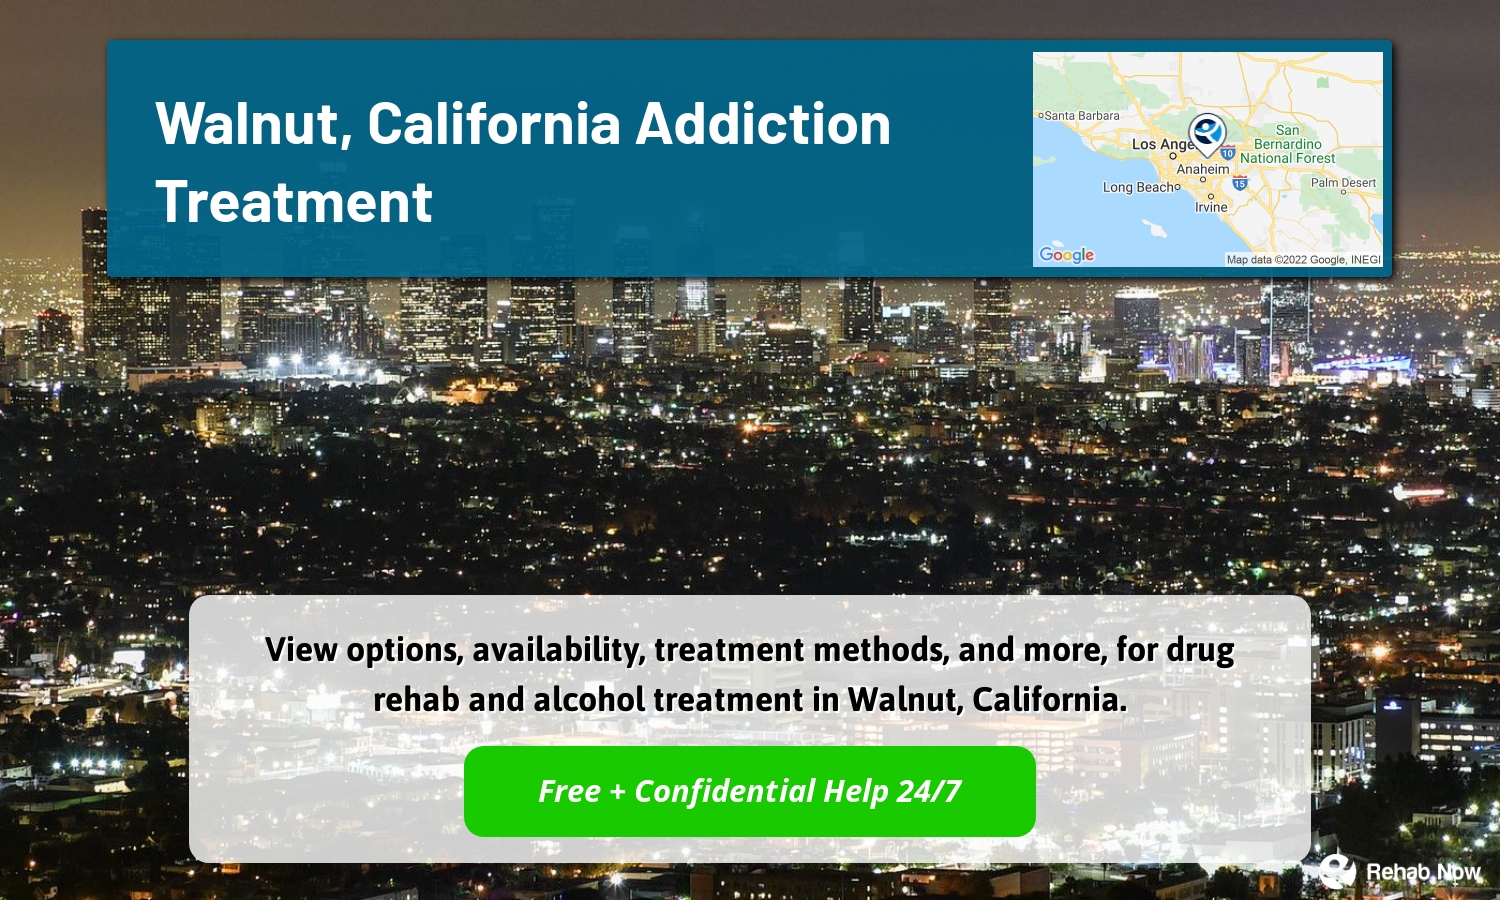 View options, availability, treatment methods, and more, for drug rehab and alcohol treatment in Walnut, California.